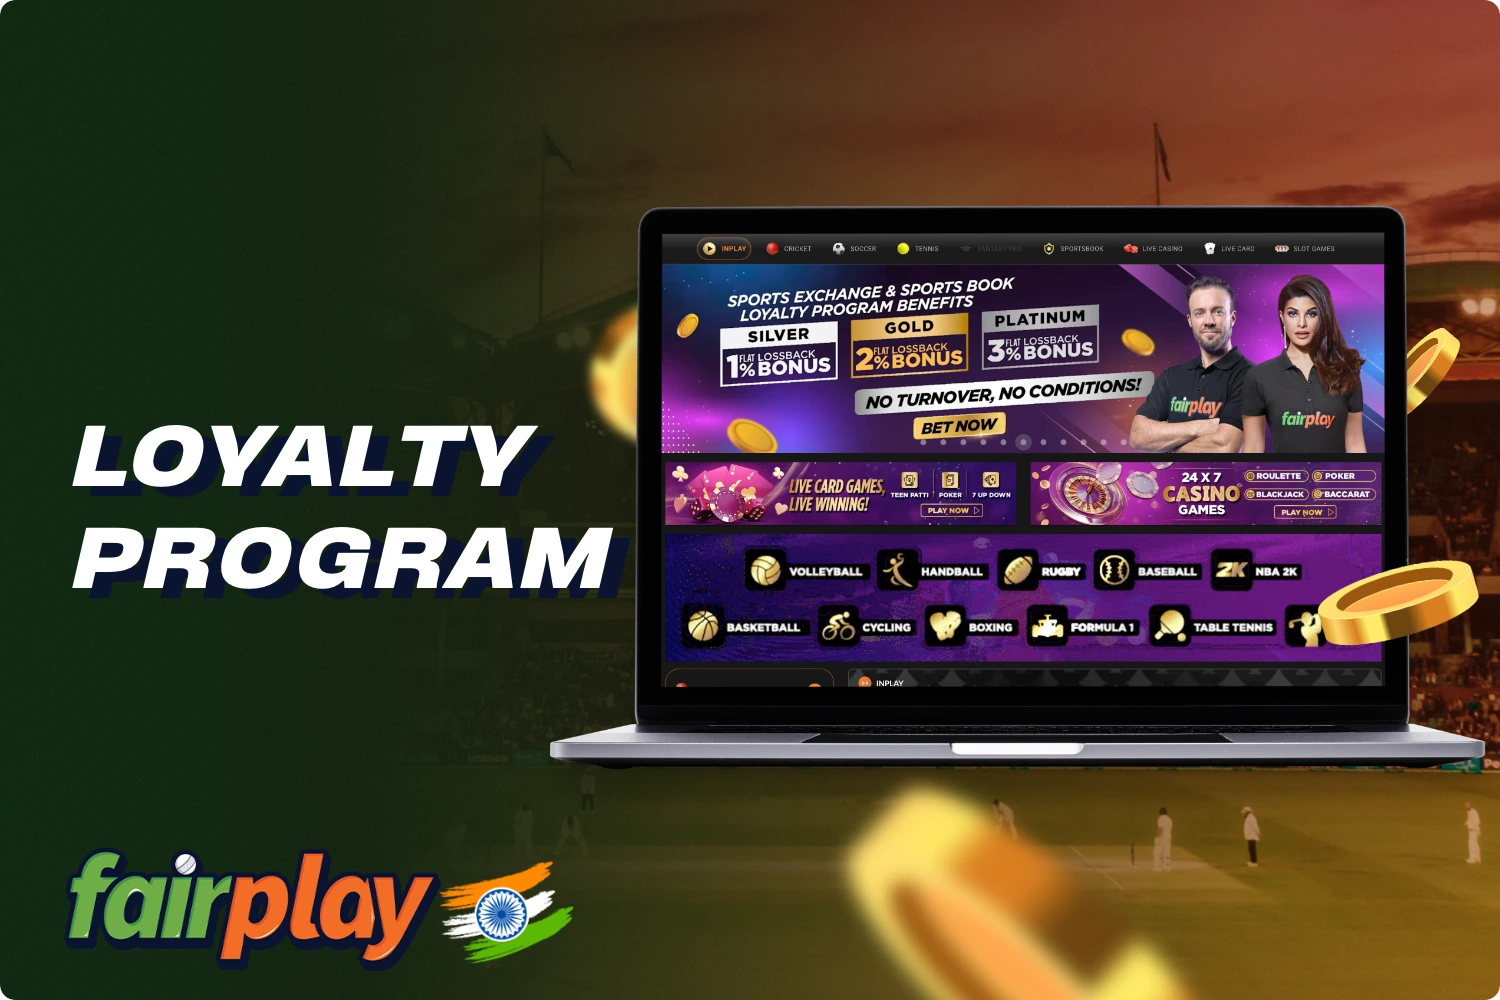 Fairplay's loyalty program allows loyal users to receive additional bonuses